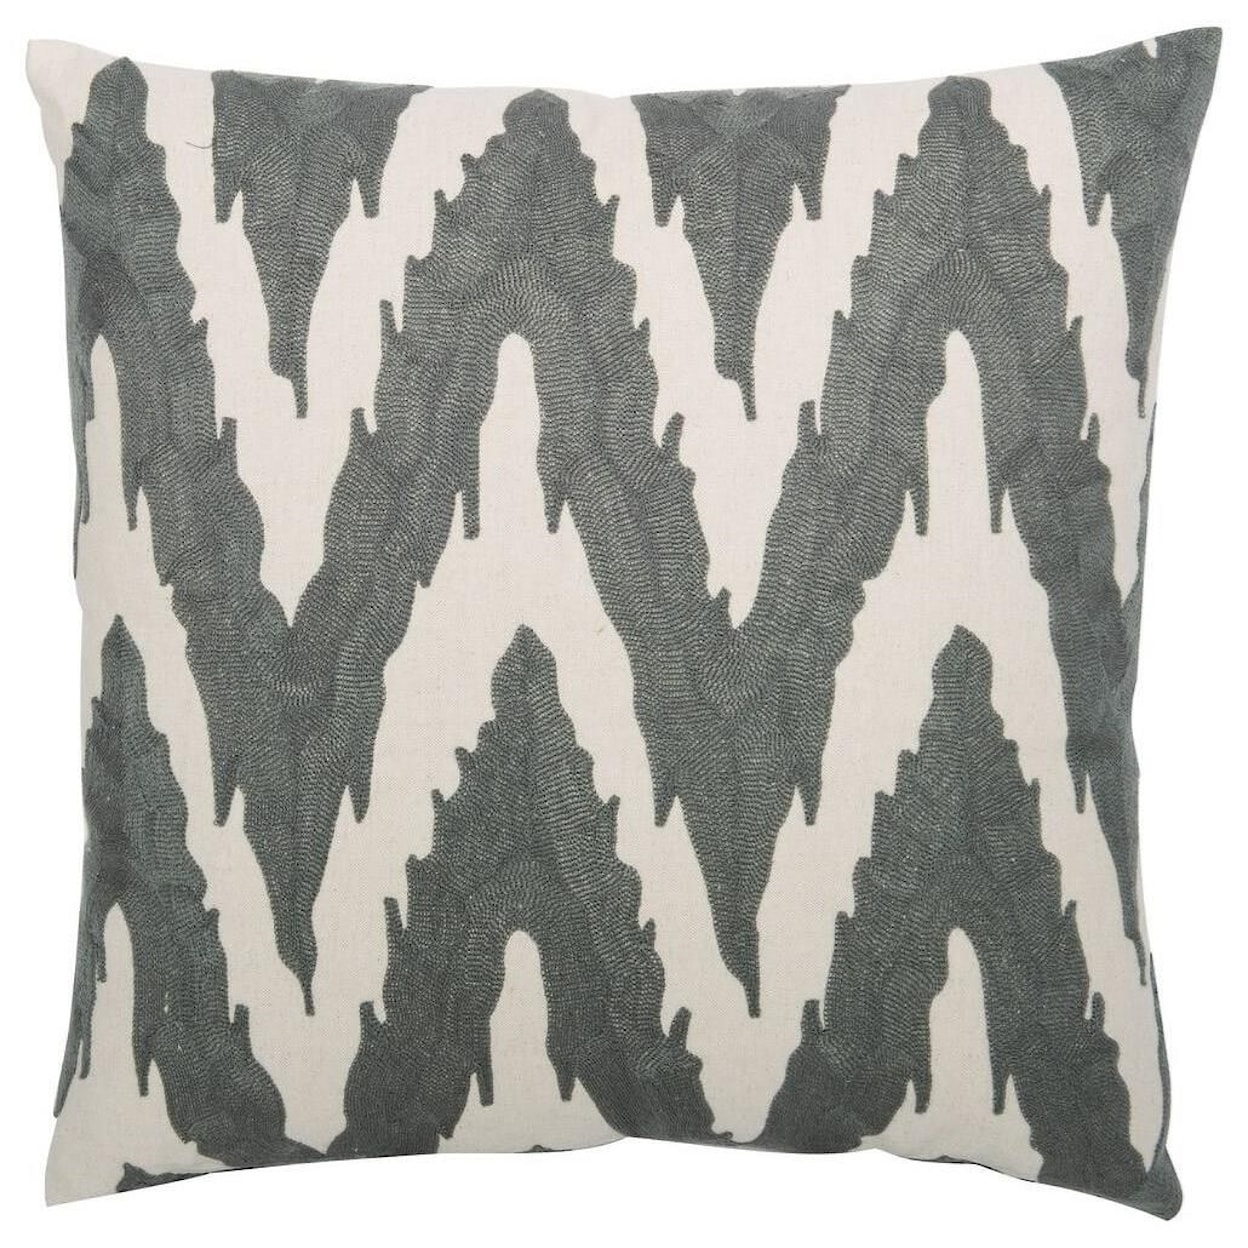 Bernhardt Luxe Pillows- Embroidered Flame Stitch (21.5" x 21.5")